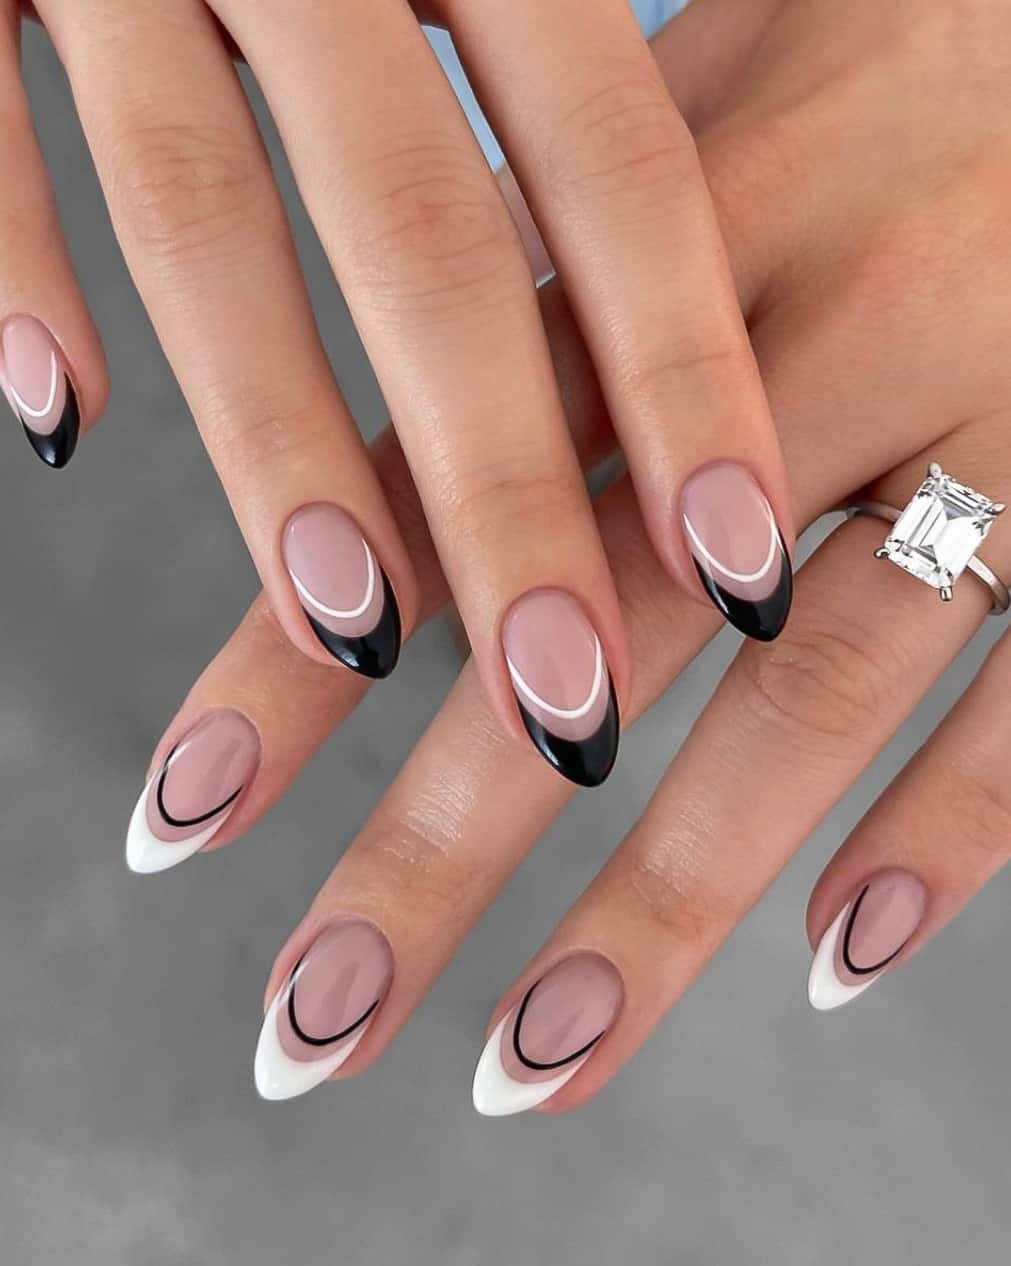 Two hands with almond nails featuring black French tips and white accent lines on one hand and white French tips with black accent lines on the other